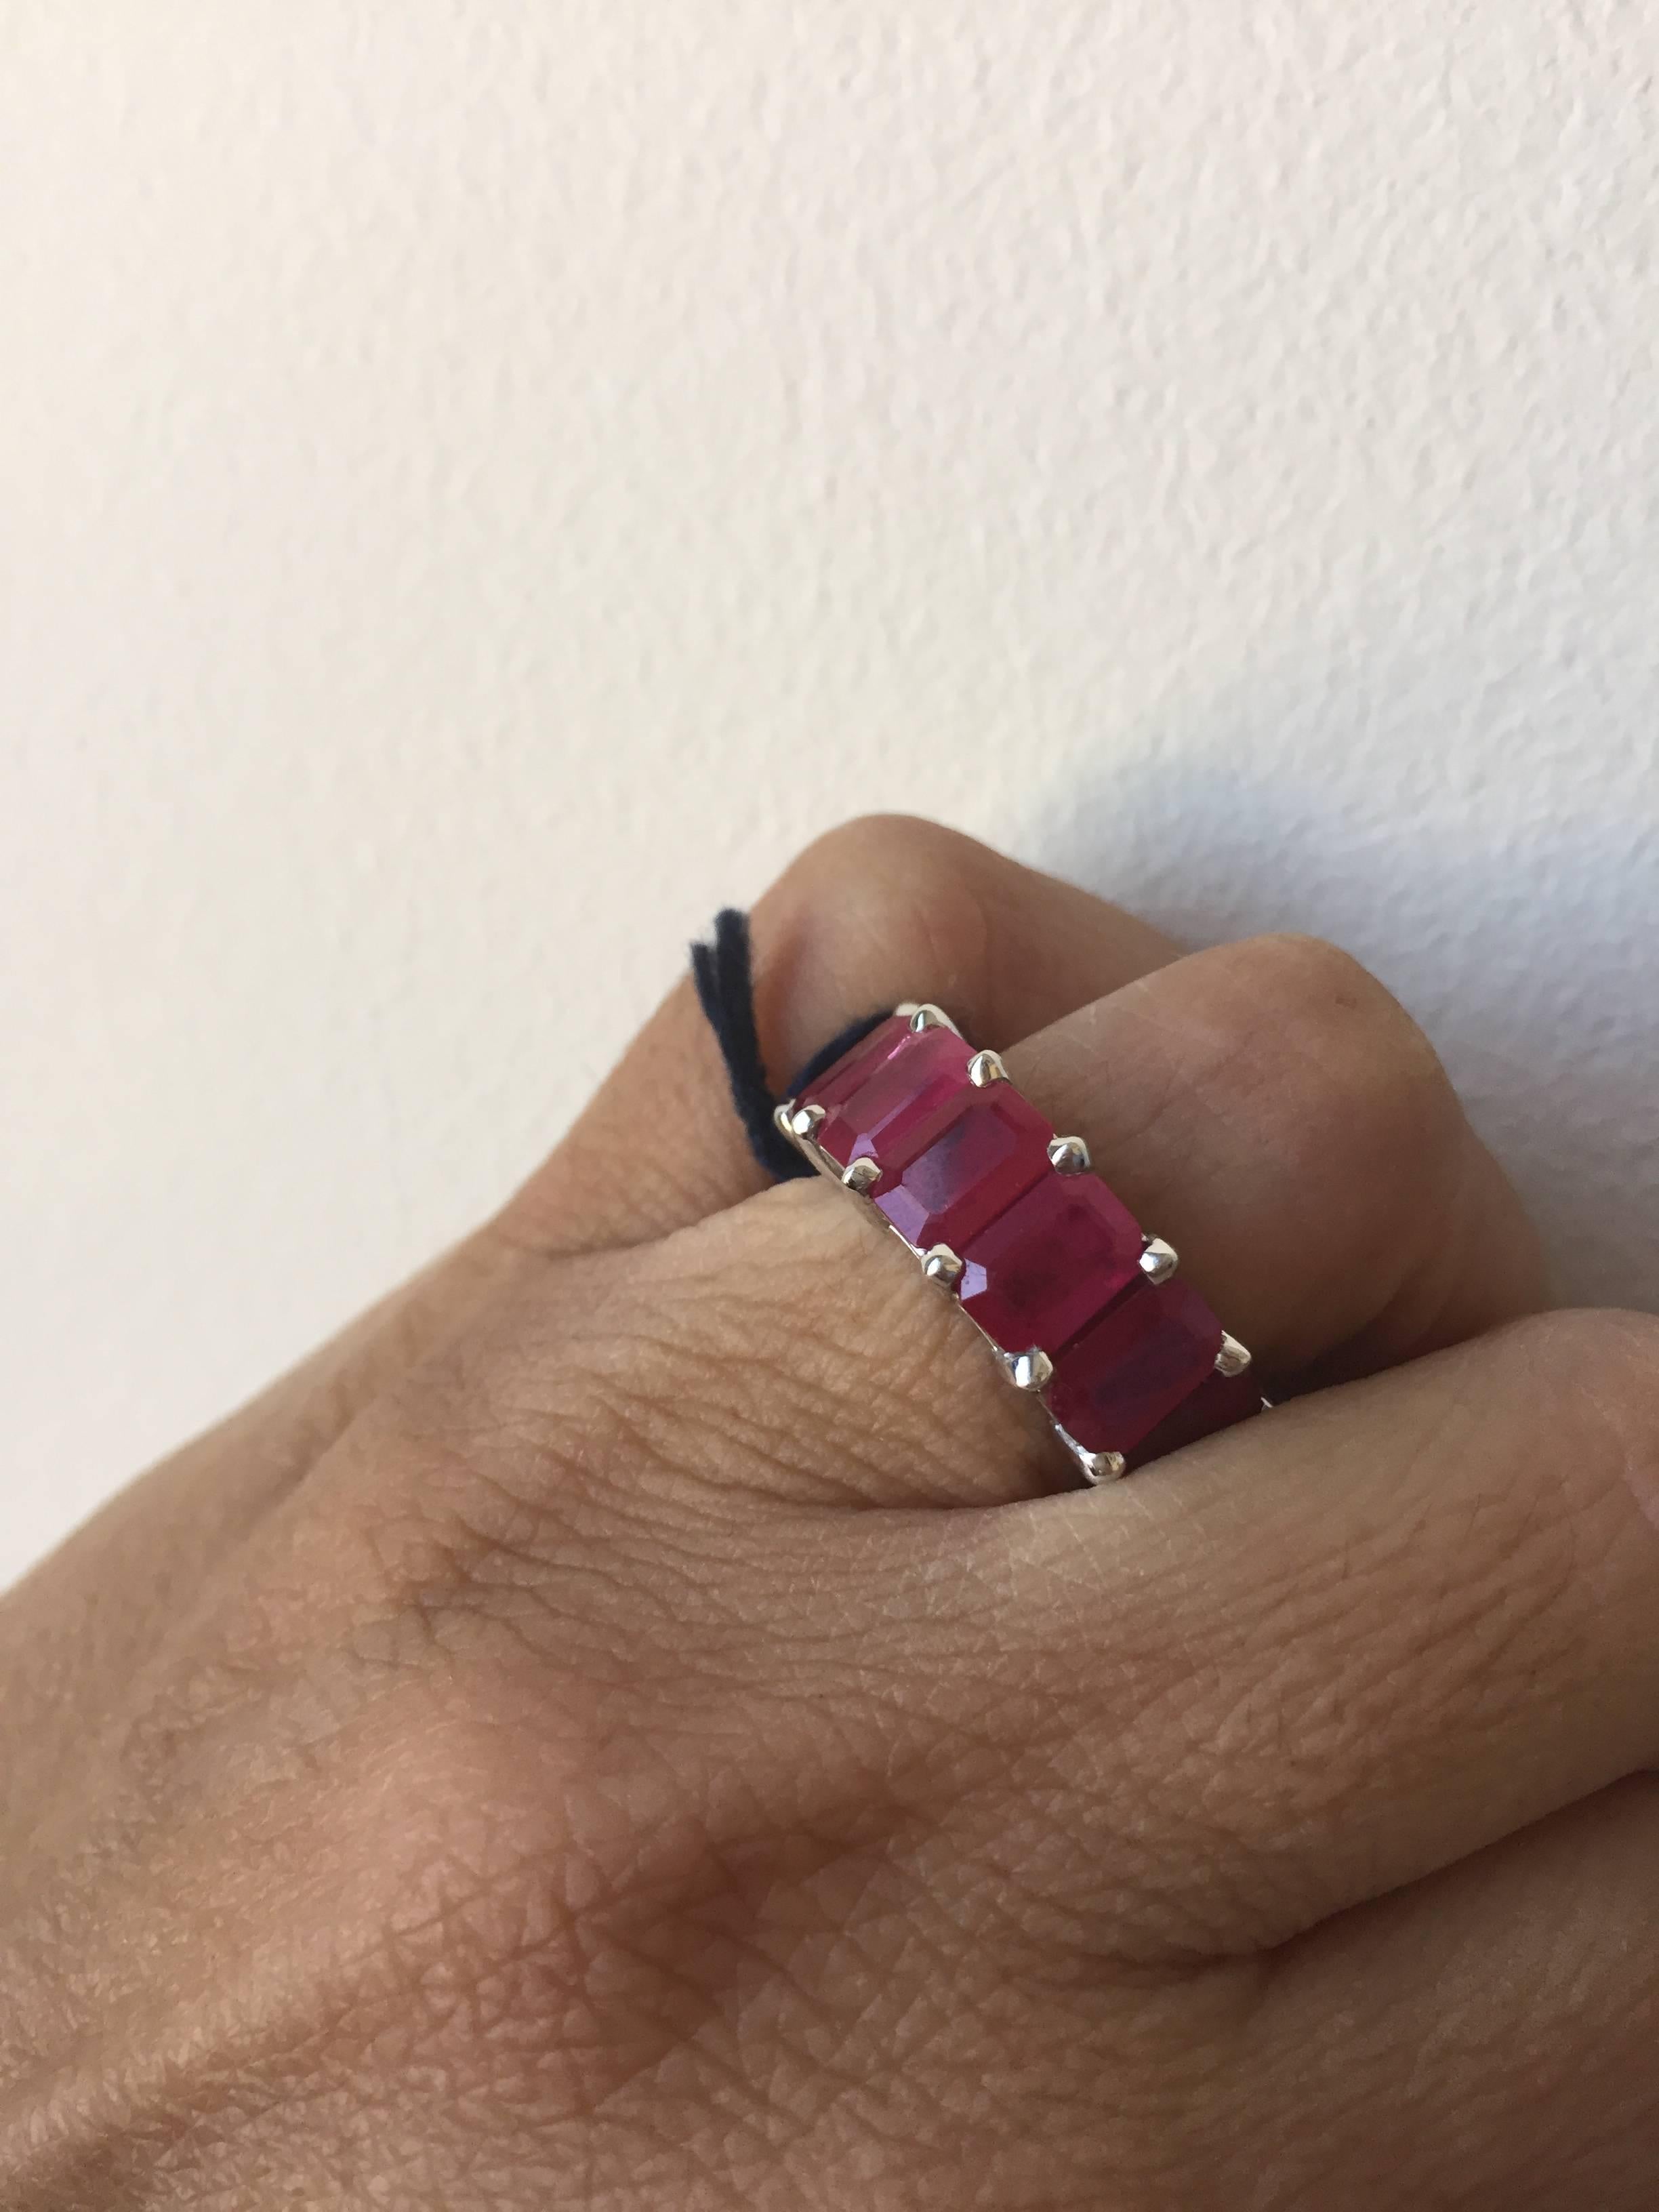 Exquisite one of a kind eternity, Burma Ruby Ring set in 14K white gold. The stones in this ring are emerald cut. The total weight of this stunning ring is 10.05 carats. The ring is a size 6.
All our pieces comes with an appraisal, performed by our